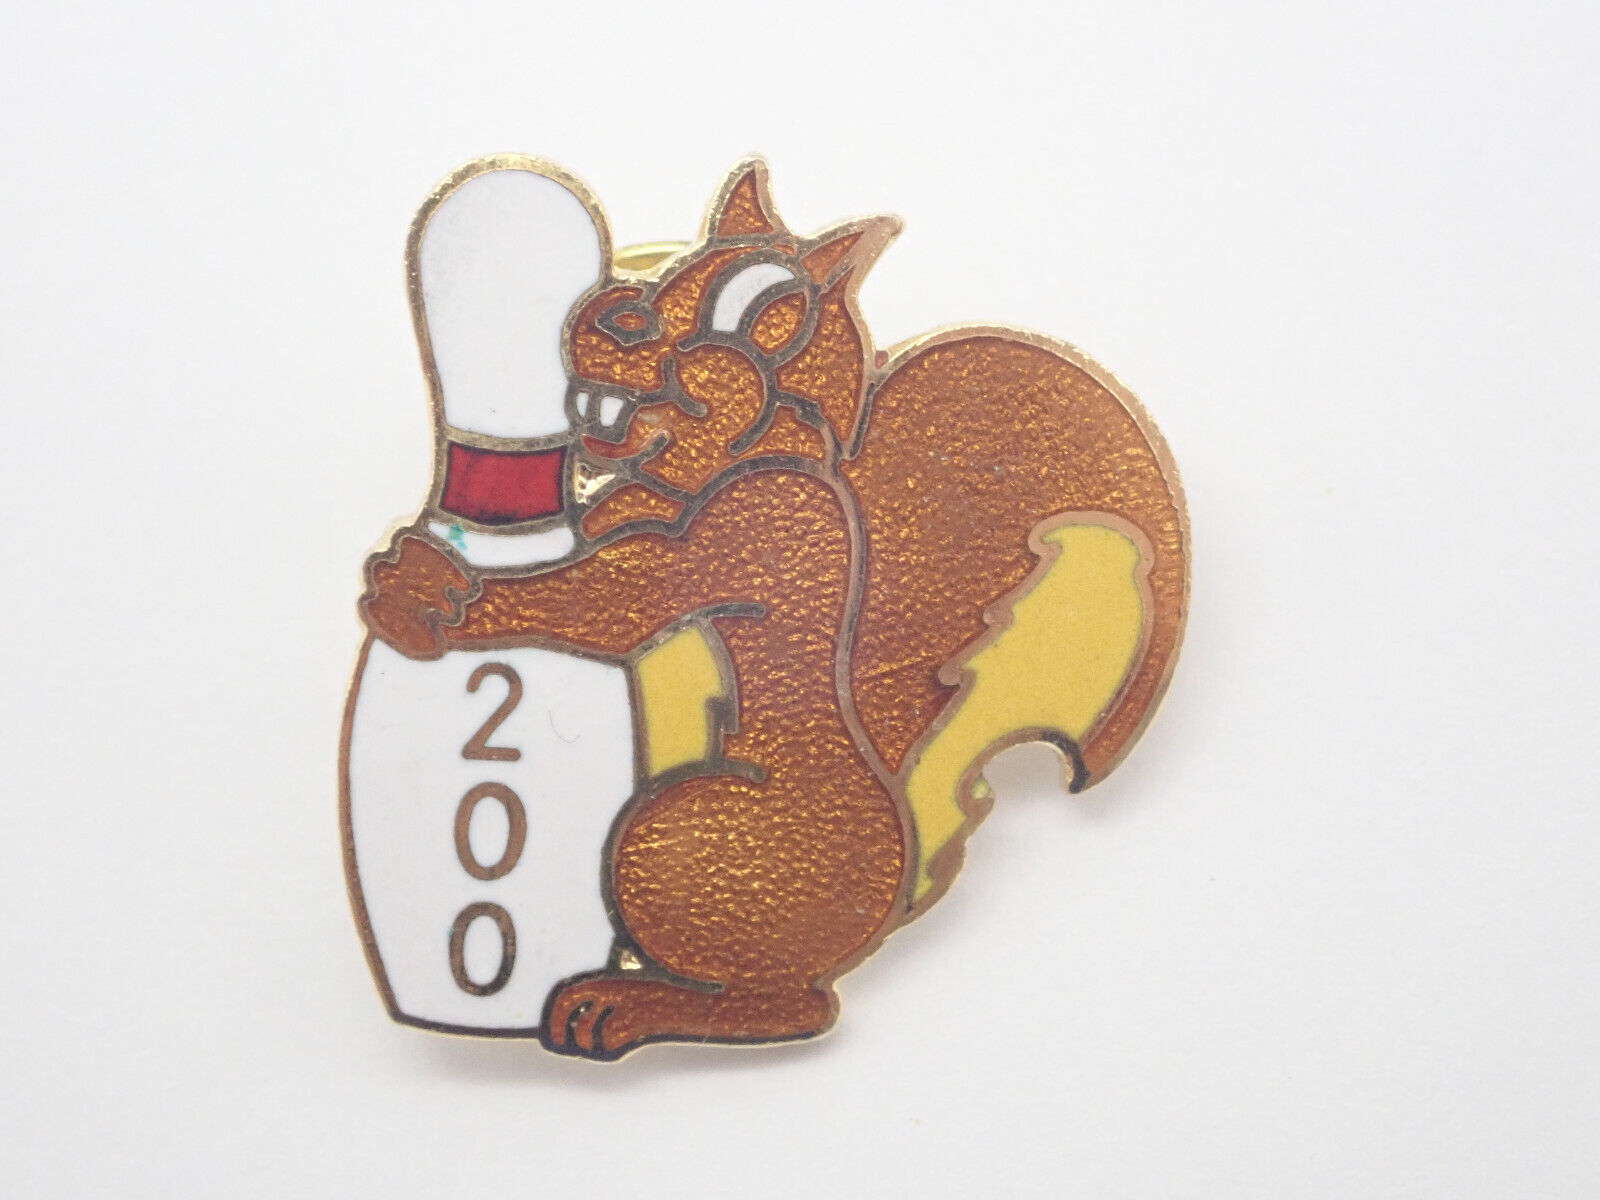 Squirrel with Bowling Pin 200 Vintage Lapel Pin